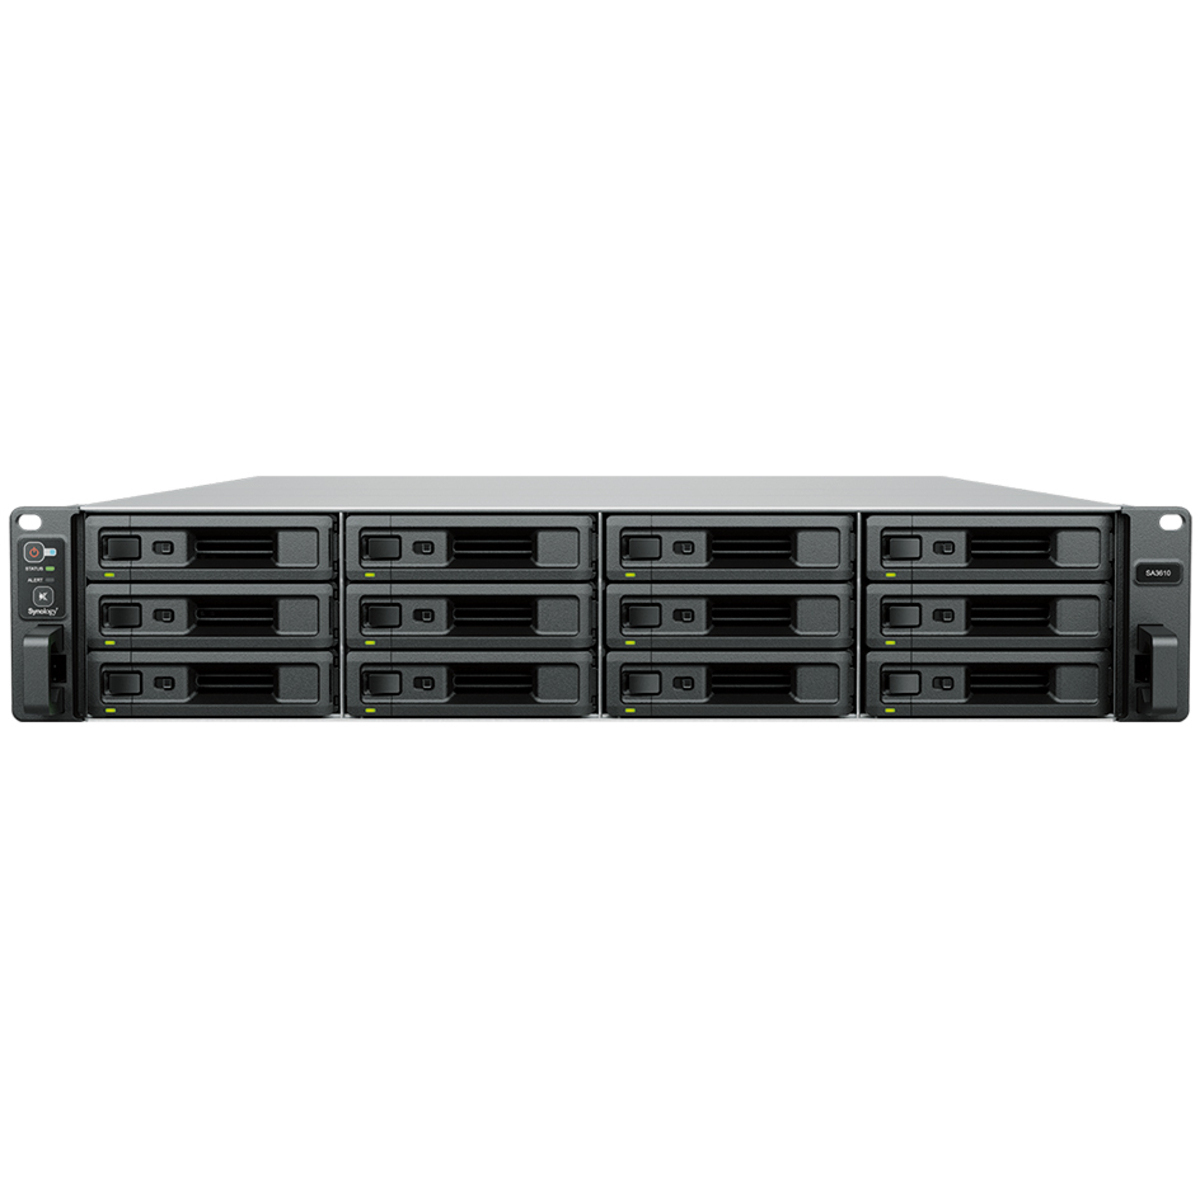 Synology RackStation SA3610 72tb 12-Bay RackMount Large Business / Enterprise NAS - Network Attached Storage Device 9x8tb Western Digital Red Pro WD8003FFBX 3.5 7200rpm SATA 6Gb/s HDD NAS Class Drives Installed - Burn-In Tested RackStation SA3610